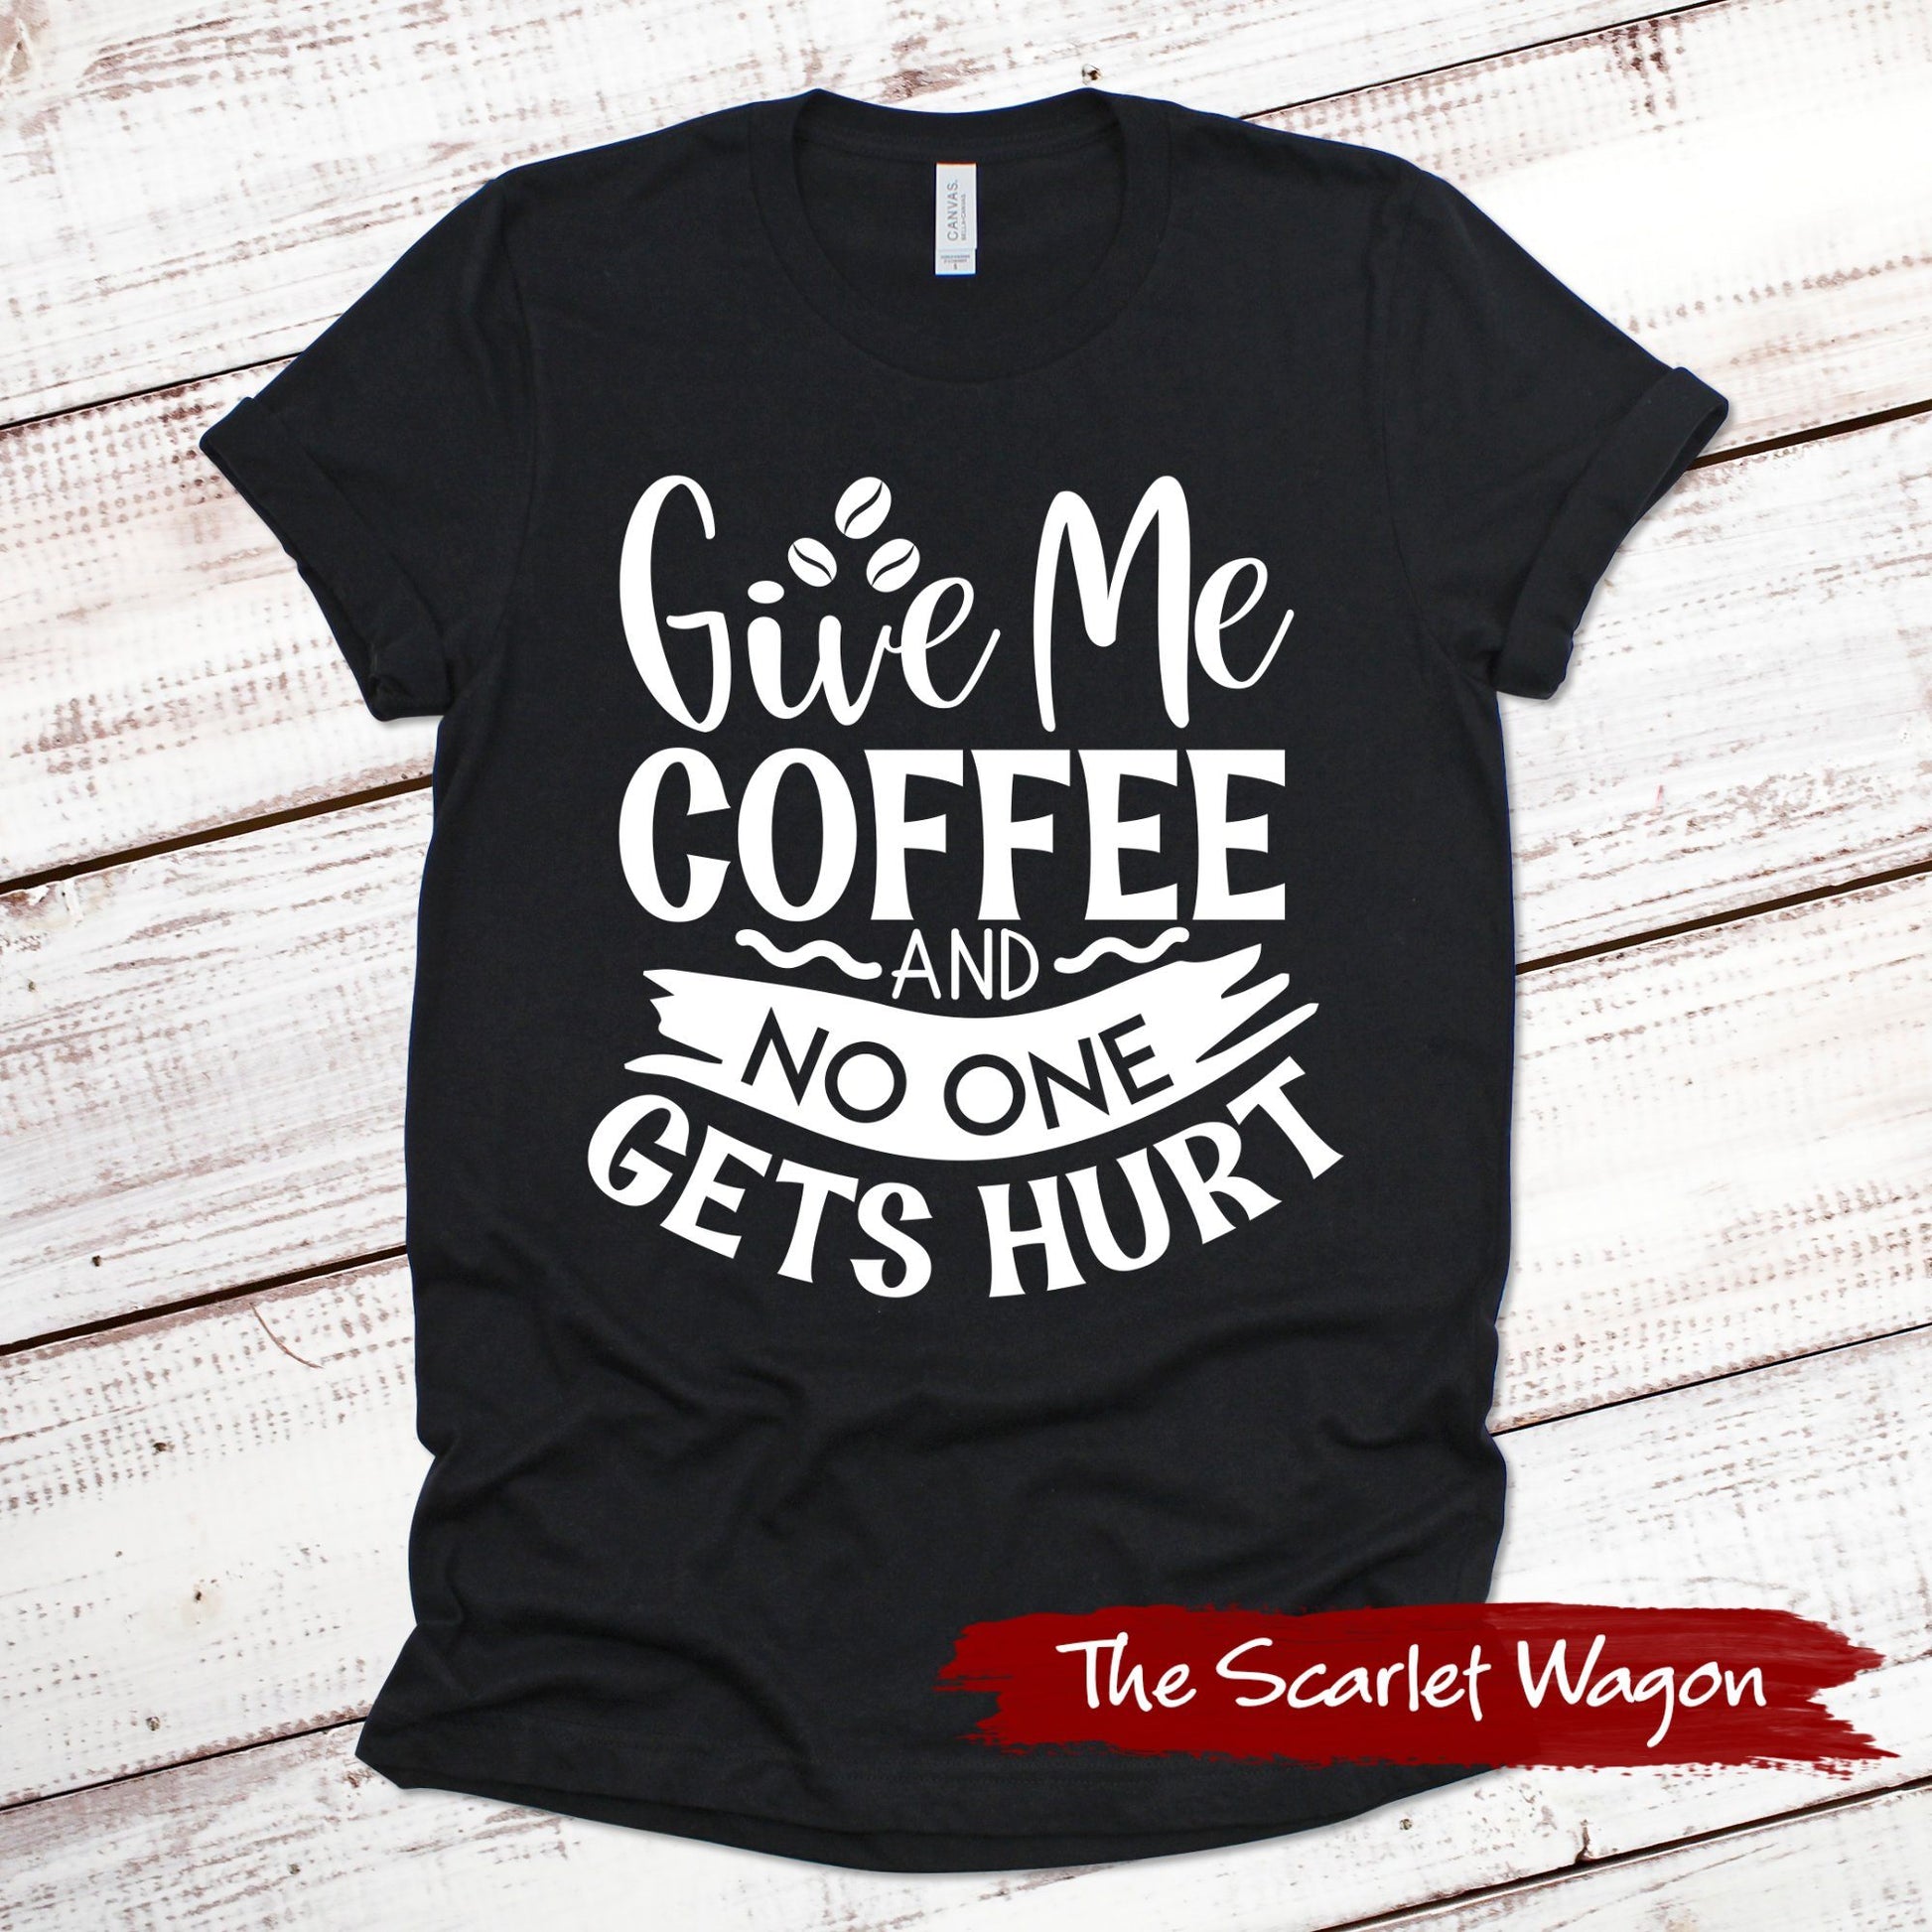 Give Me Coffee and No One Gets Hurt Funny Shirt Scarlet Wagon Black XS 